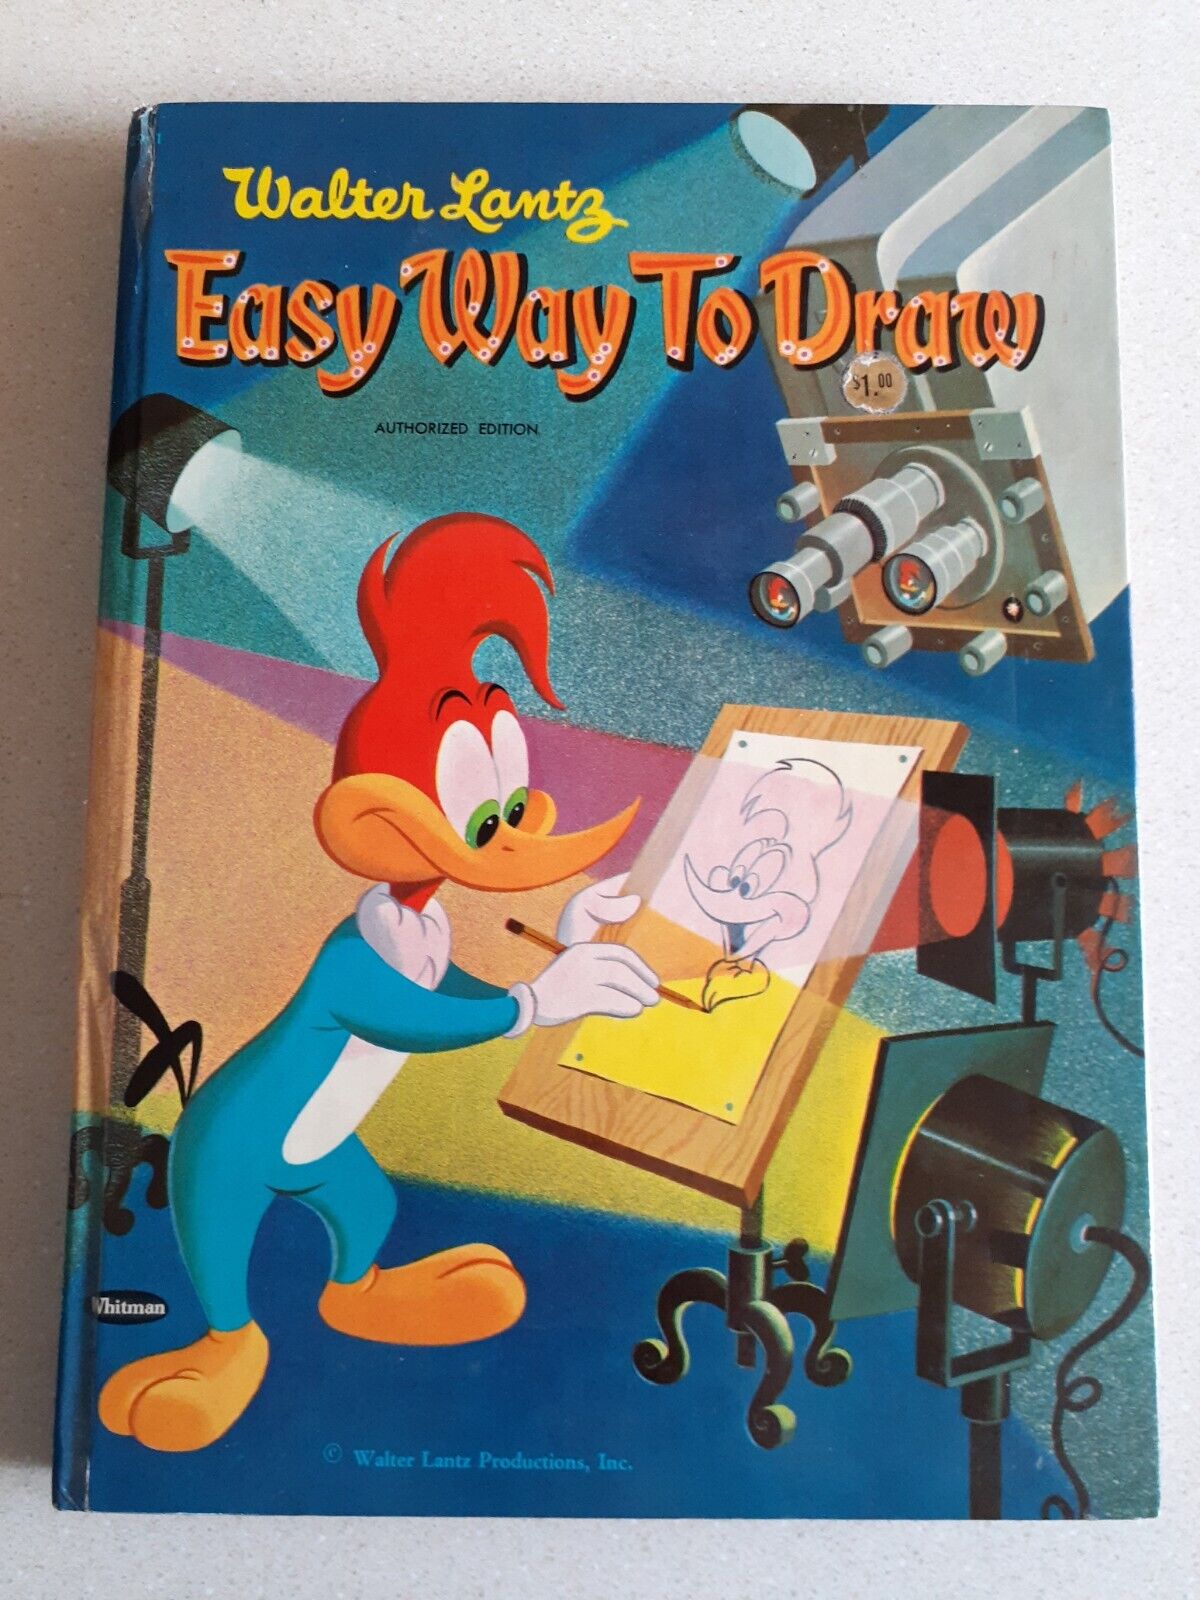 Vintage 1958 Whitman Step by Step Walter Lantz Easy Way To Draw Woody Woodpecker